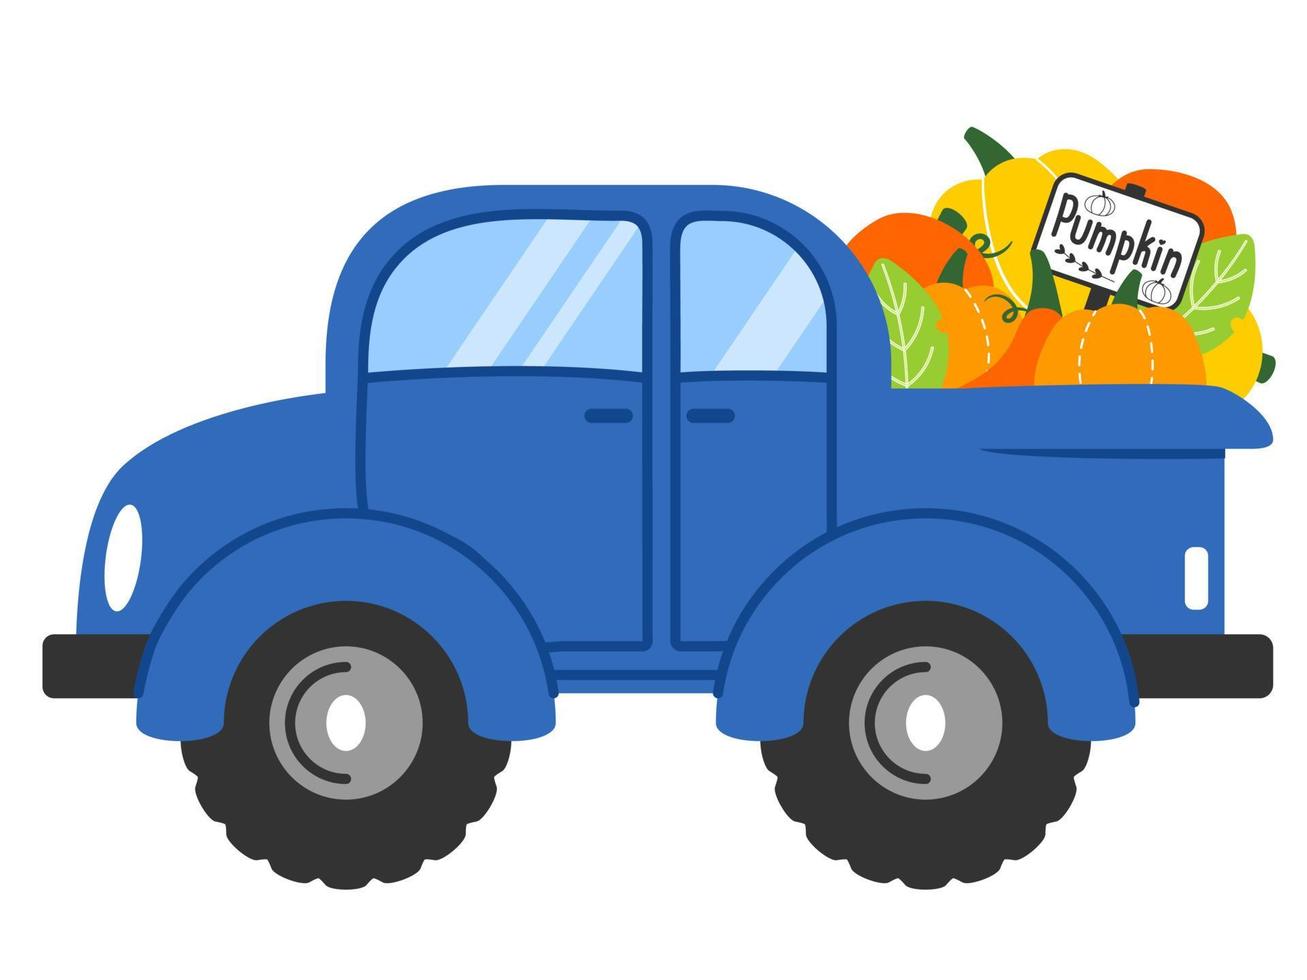 Pumpkins for sale in the back of a pickup truck. Harvest transportation. Vegetable harvest season. Cartoon style vector illustration suitable for posters, stickers, banners, cards, etc.